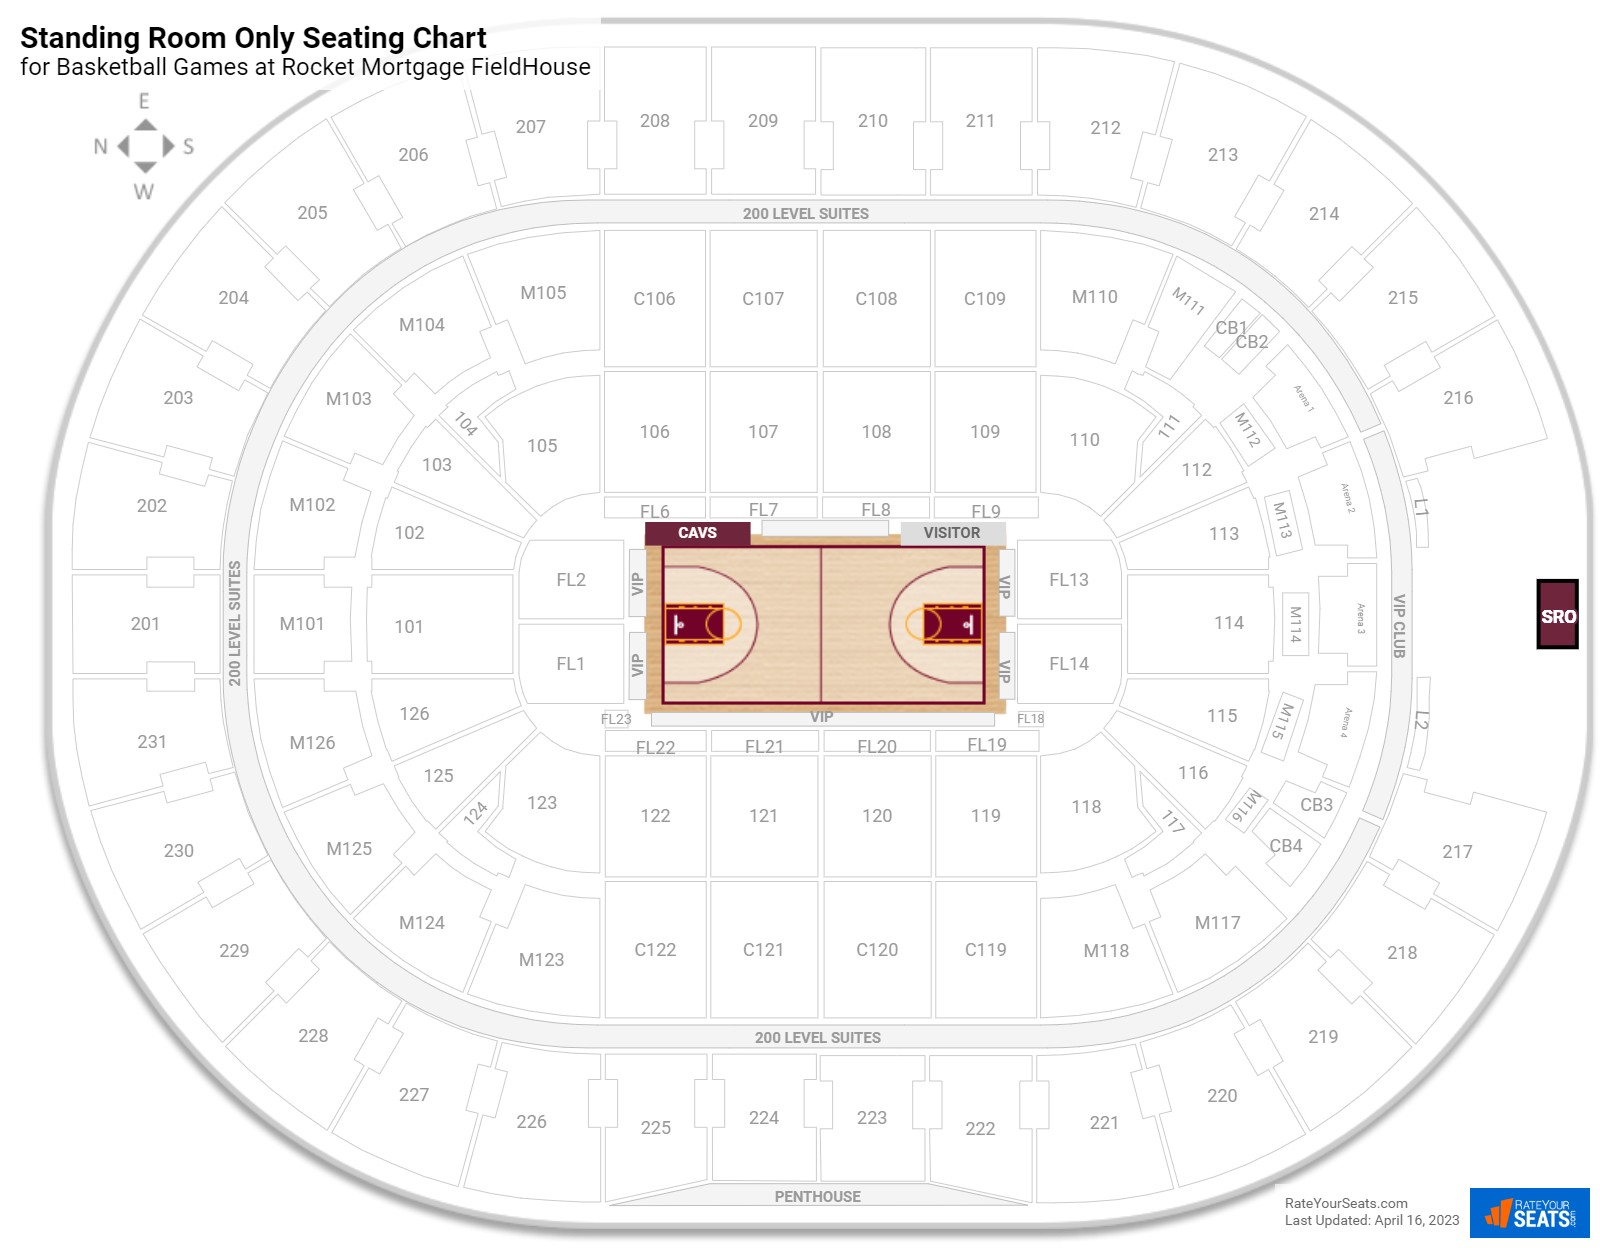 Basketball Standing Room Only Seating Chart at Rocket Mortgage FieldHouse